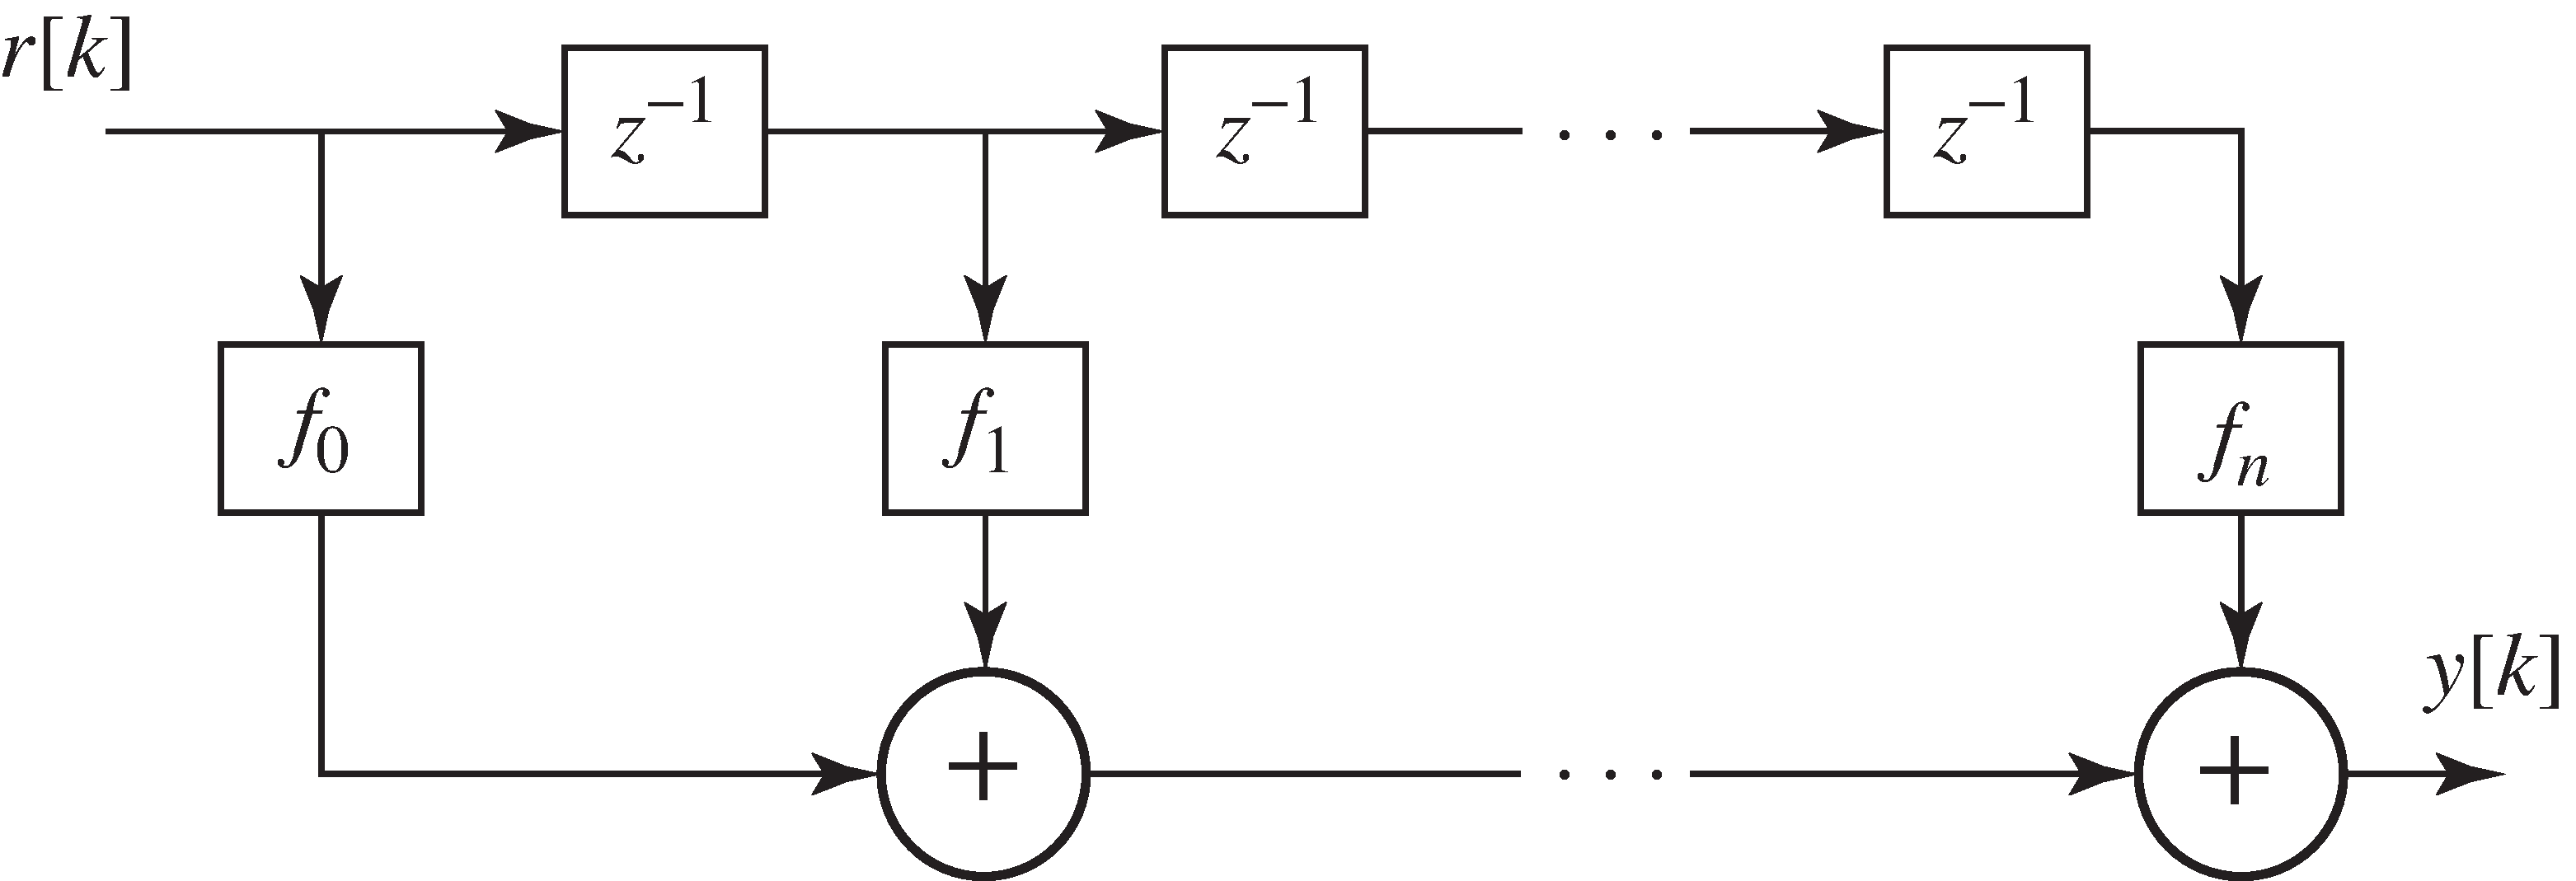 The direct form FIR filter of Equation 5 can be pictured as a tapped delay line where each z^-1 block represents a time delay of one symbol period. The impulse response of the filter is f_0, f_1, ..., f_n.